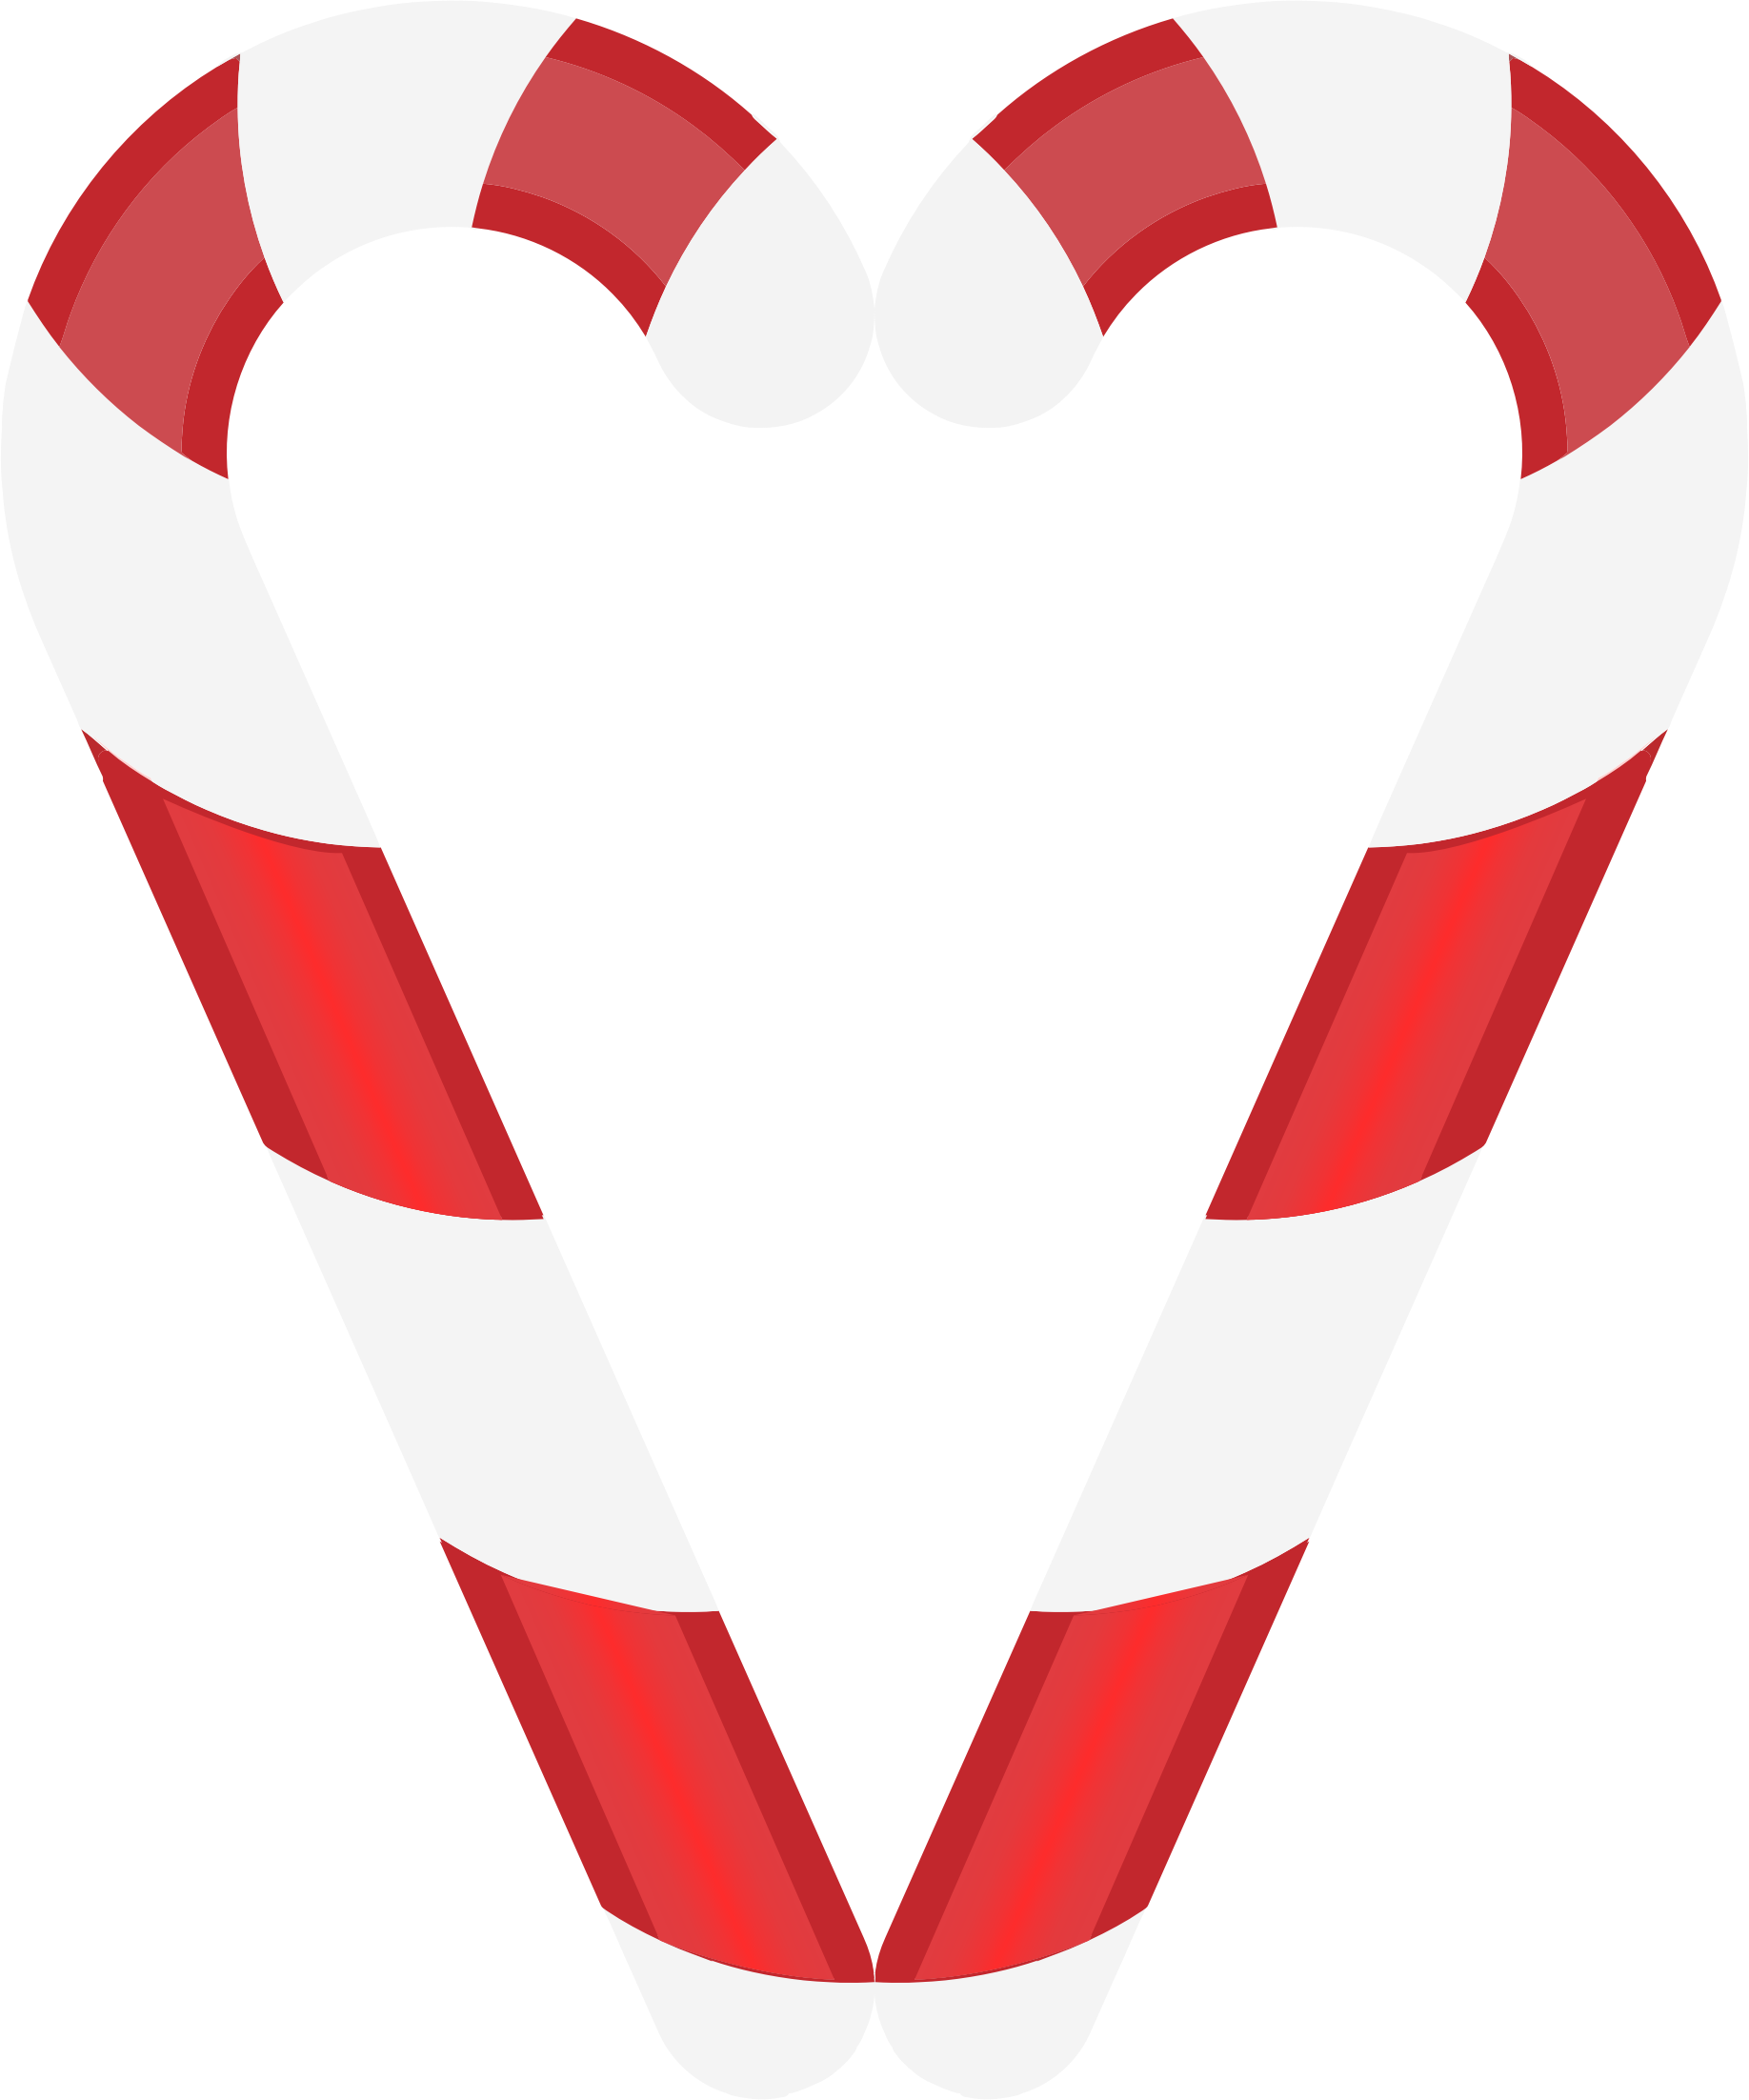 Big Image - Candy Cane In A Heart Shape (1836x2204)